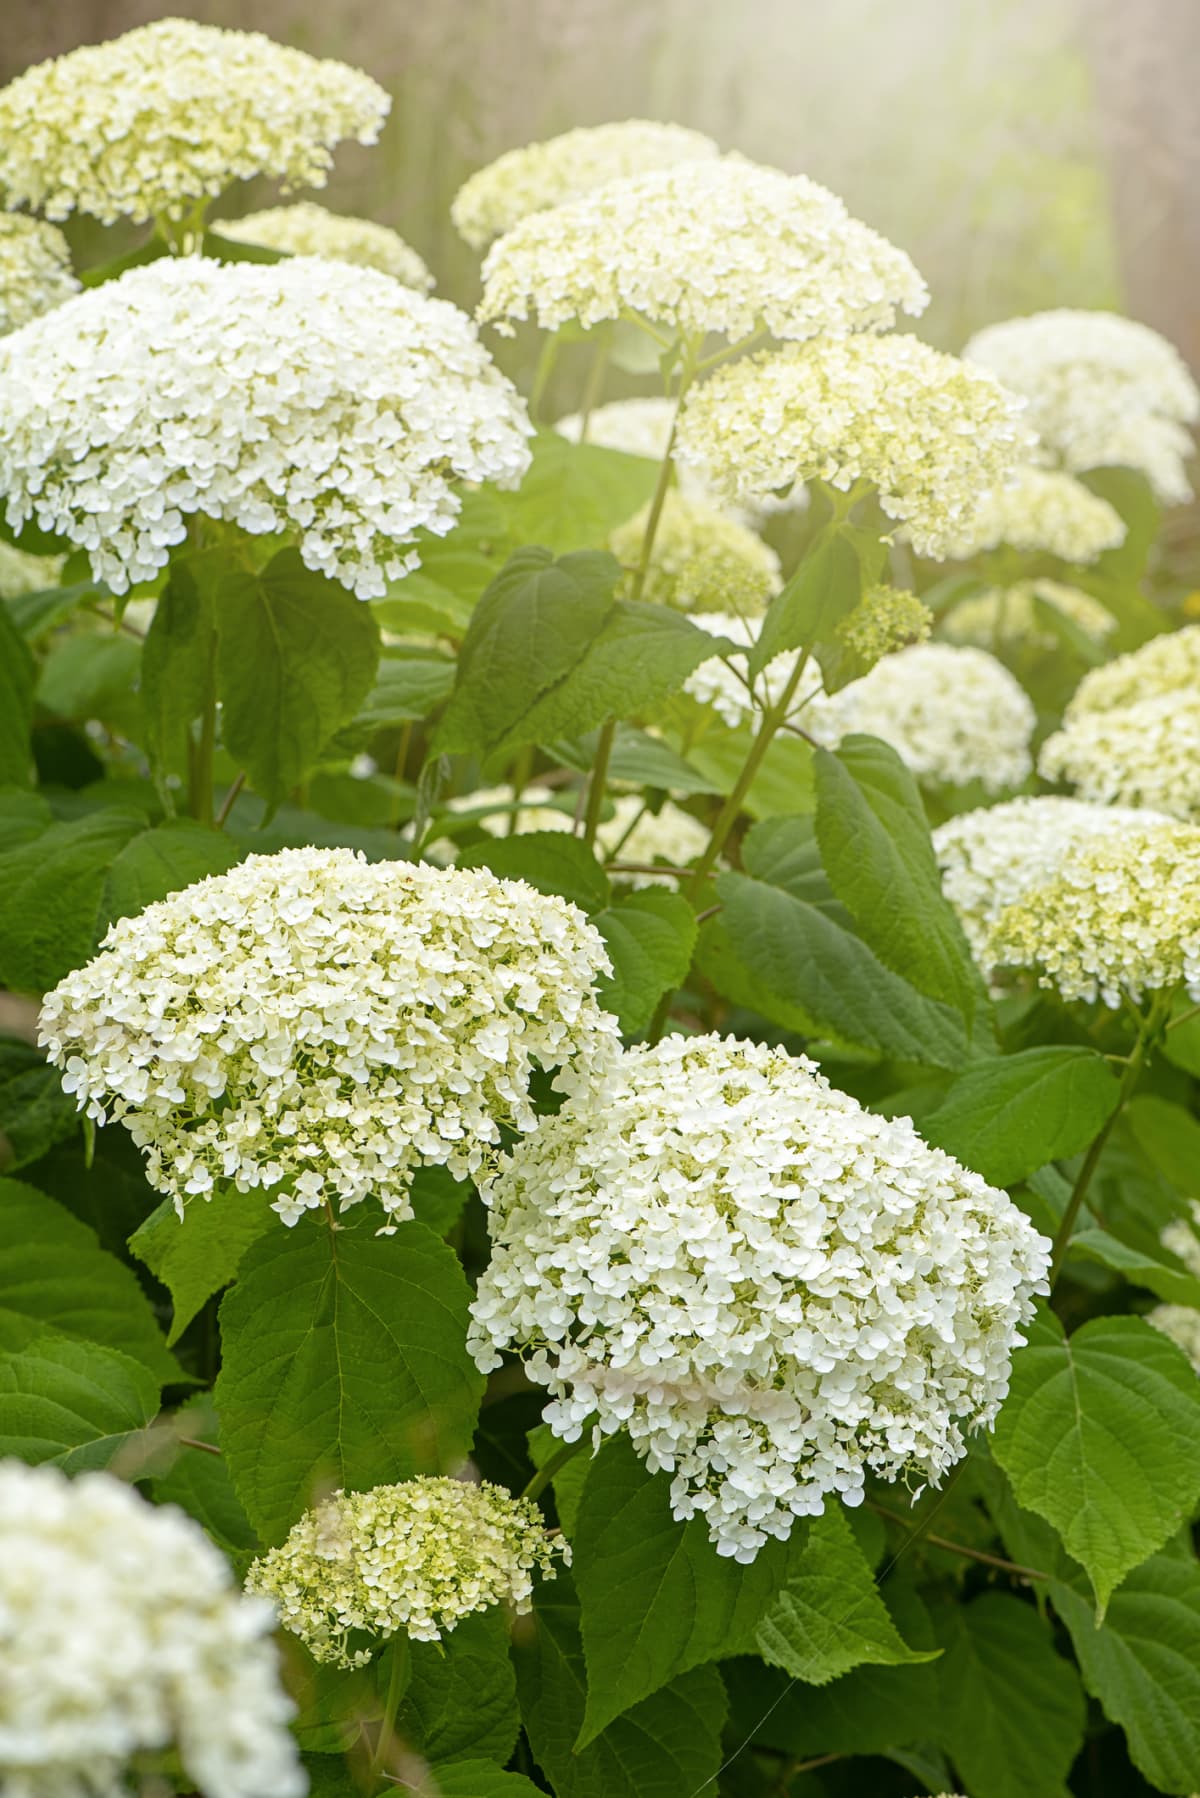 White hydrangea plants with multiple flowers